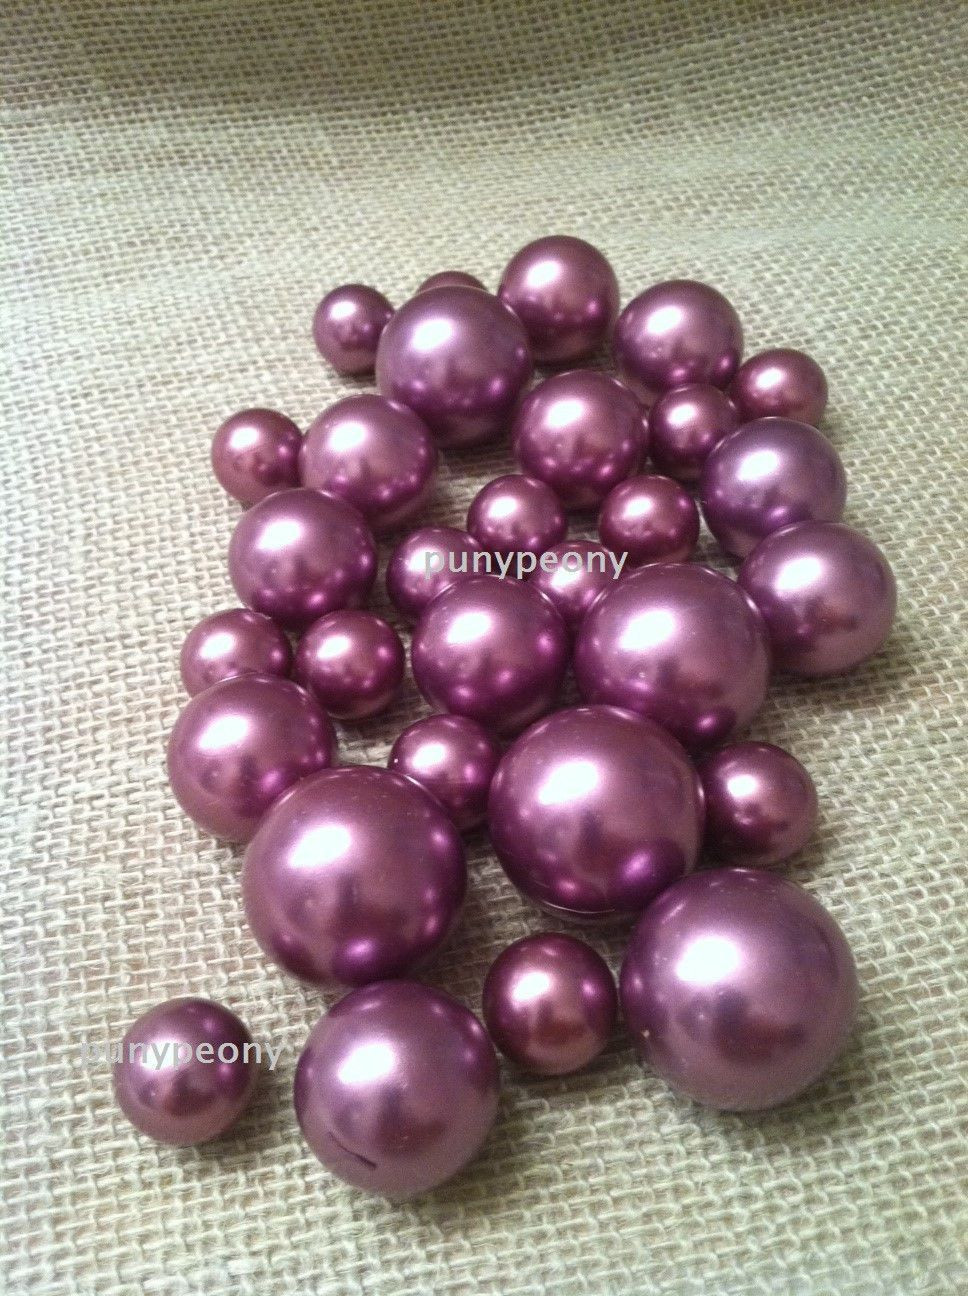 11 Fabulous Dark Purple Vase Fillers 2024 free download dark purple vase fillers of 80pc decorative pearls mix size over 30 colors for floating pearl pertaining to 80pc decorative pearls mix size over 30 colors for floating pearl centerpieces vas